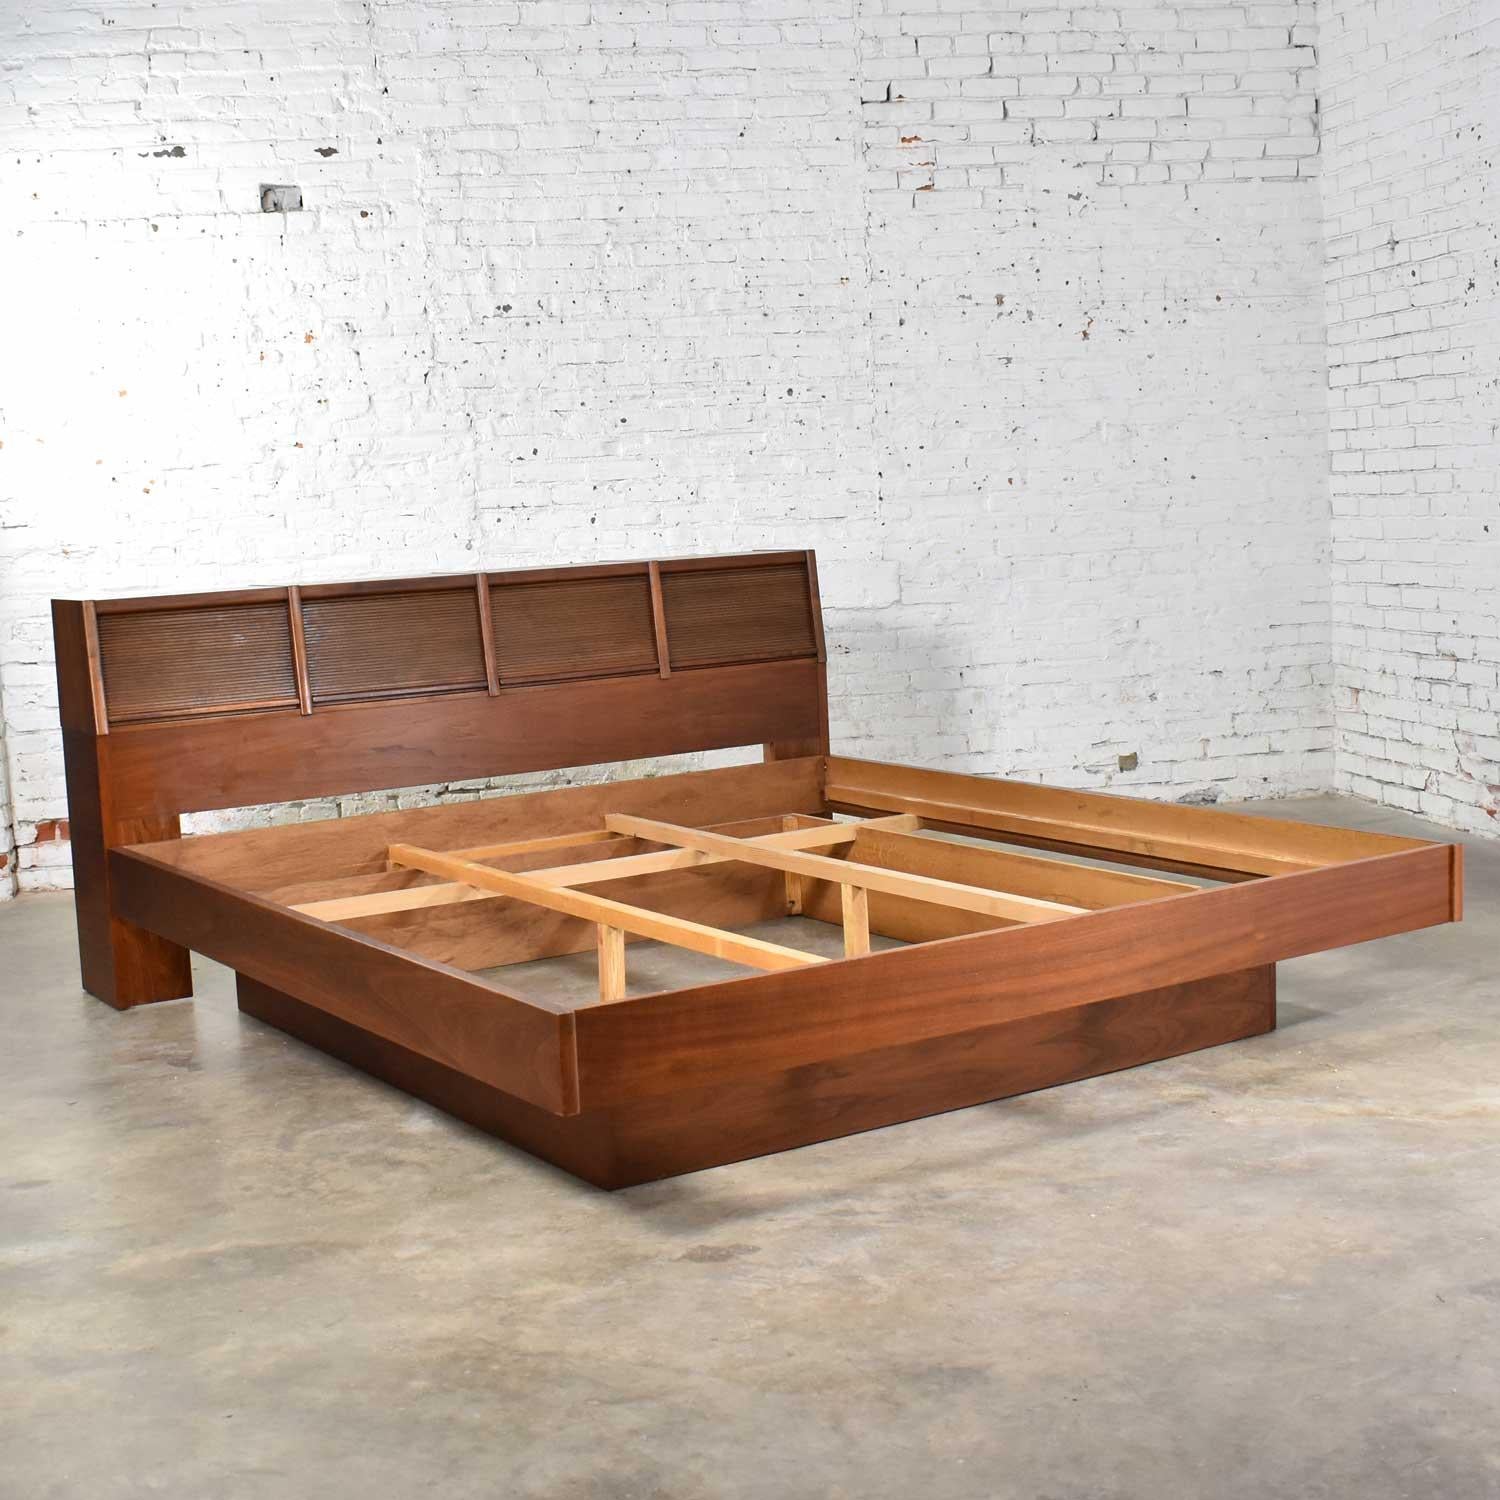 20th Century Barzilay Scandinavian Modern Style King Bookcase Platform Bed with Tambour Doors